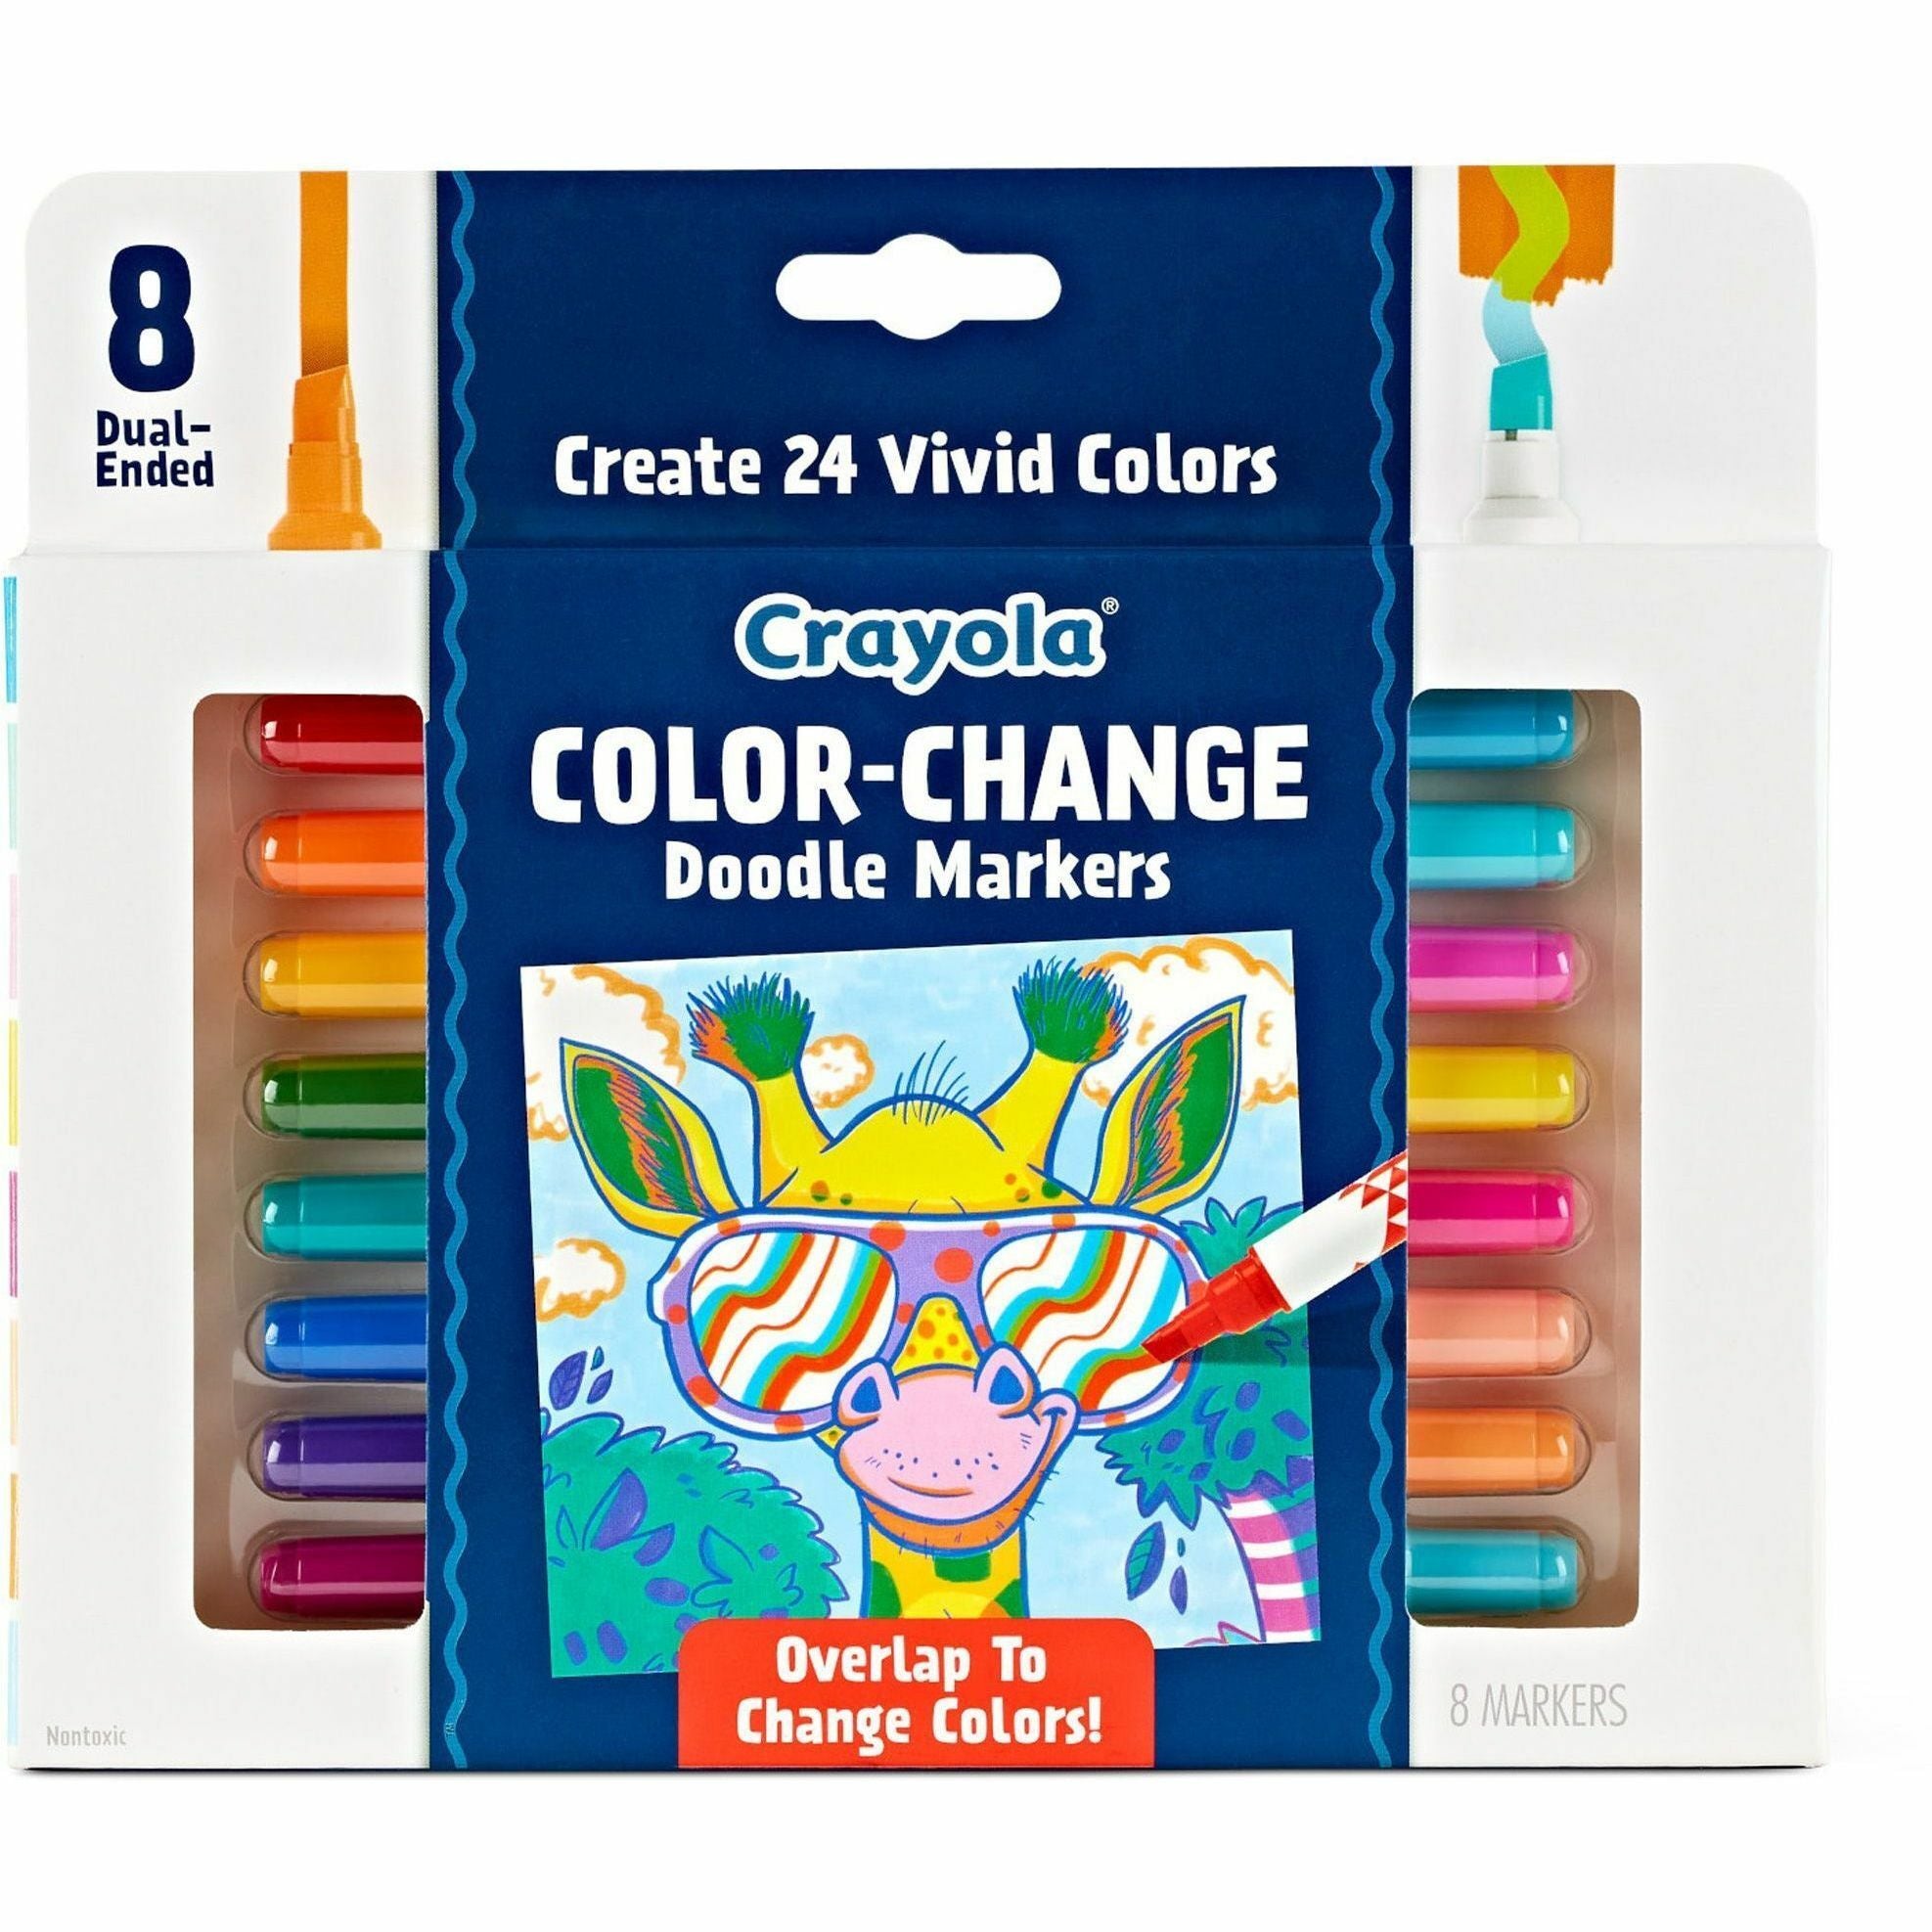 crayola-color-change-doodle-markers-chisel-marker-point-style-multicolor-8-pack_cyo588315 - 3